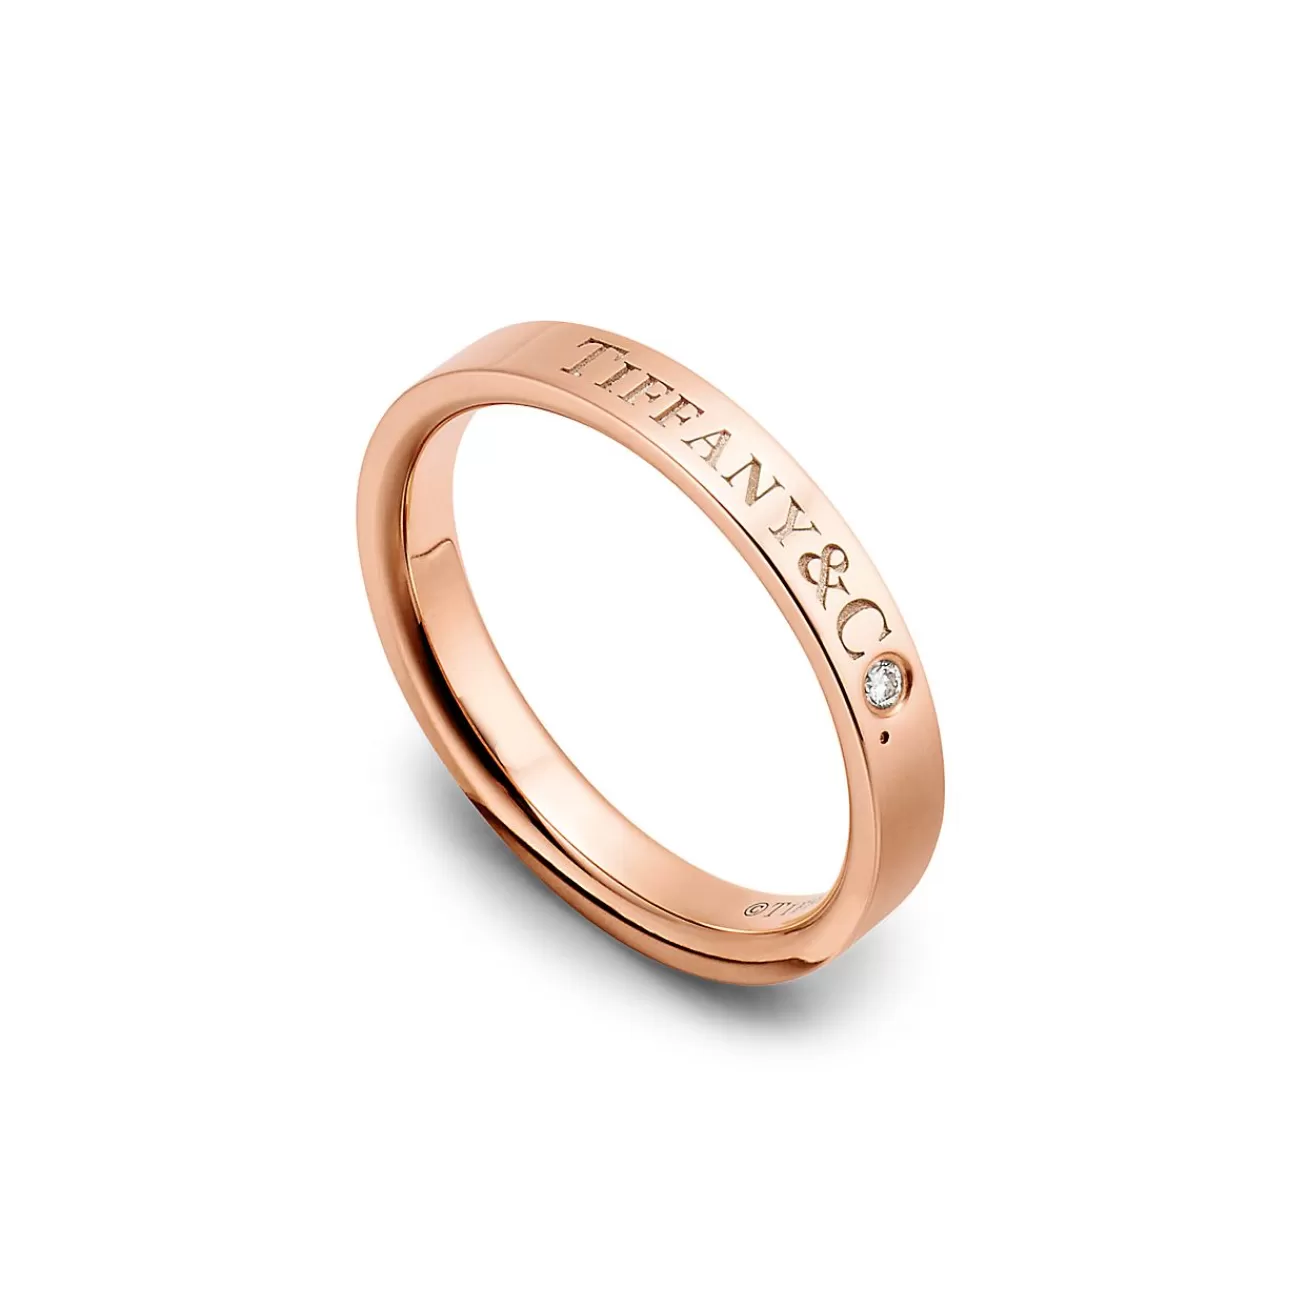 Tiffany & Co. T&CO.® Band Ring in Rose Gold with a Diamond | ^ Rings | Rose Gold Jewelry